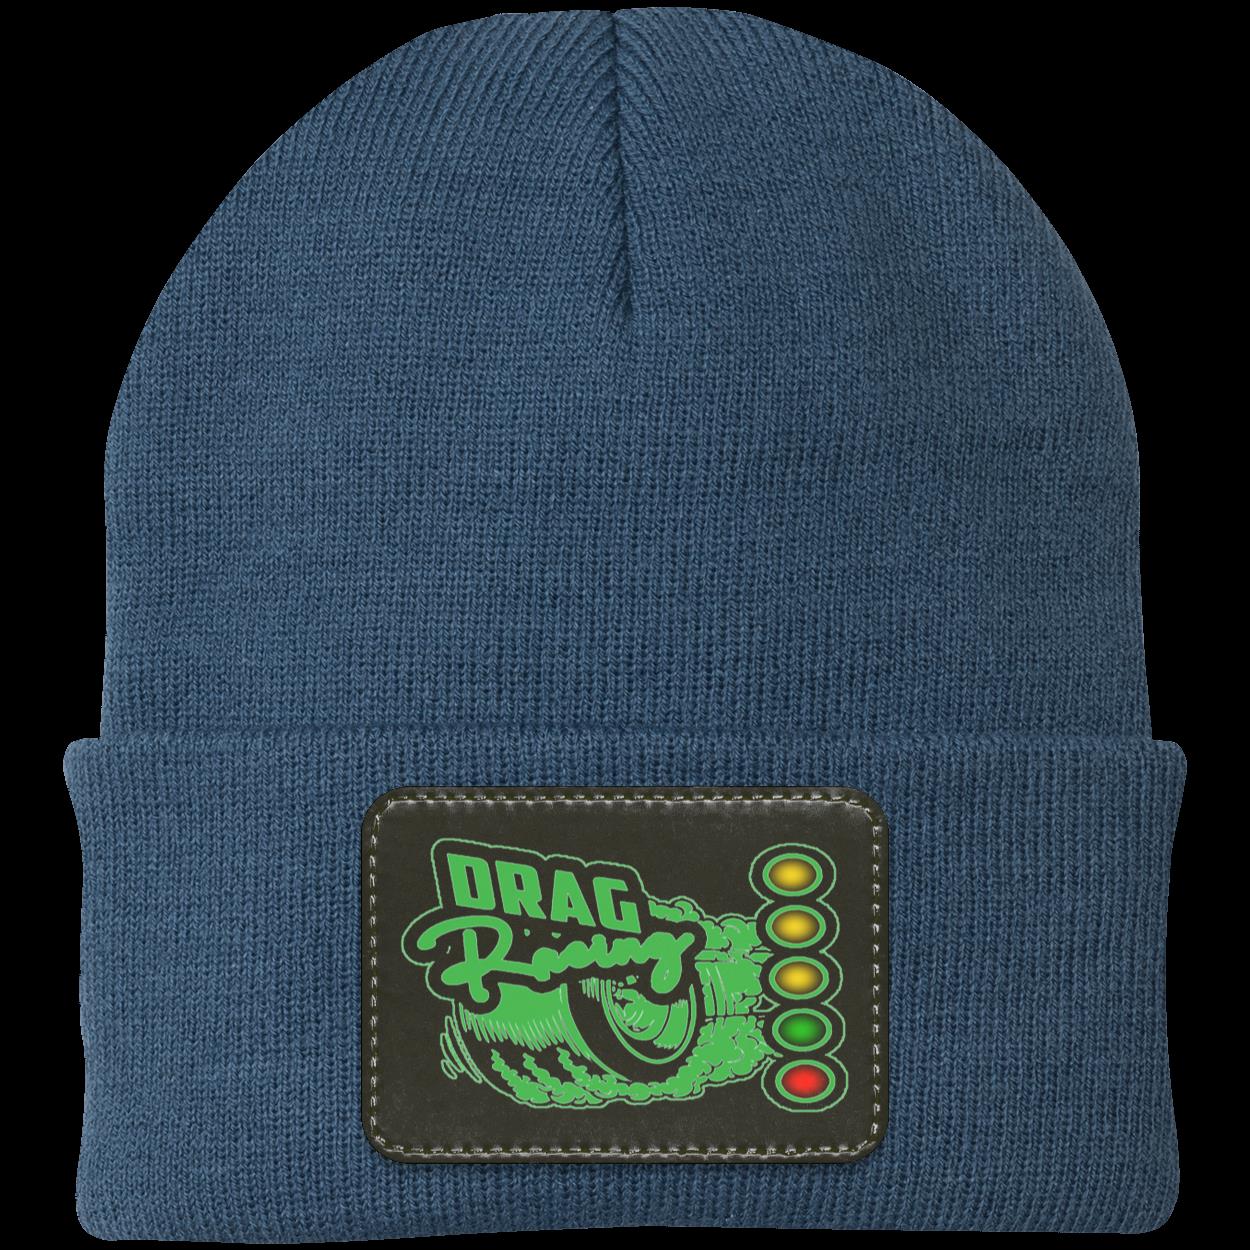 Drag Racing Patched Knit Cap